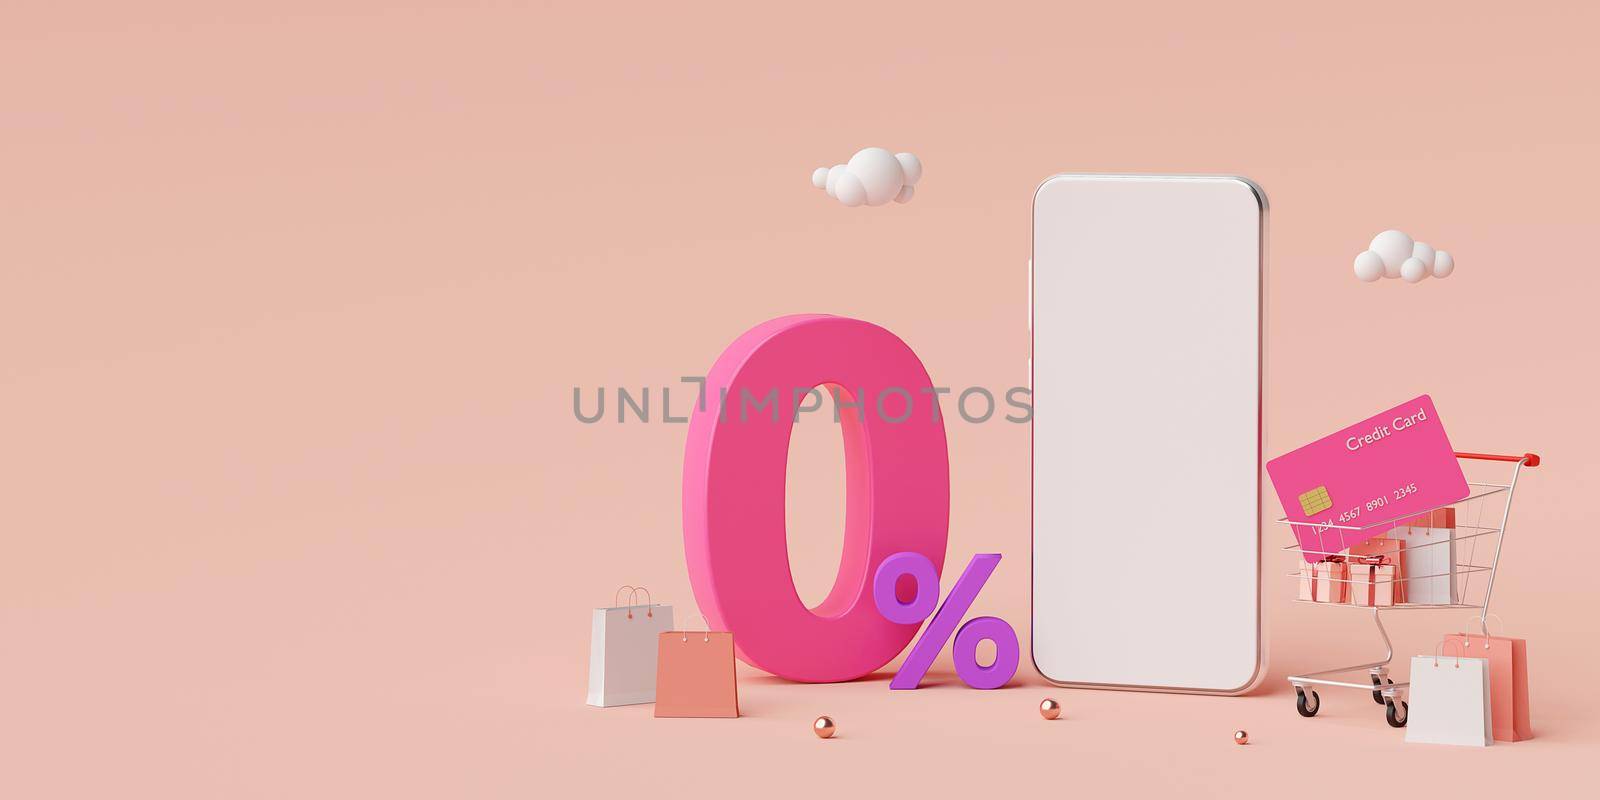 Shopping online on smartphone with special offer 0% interest installment payments, 3d illustration by nutzchotwarut